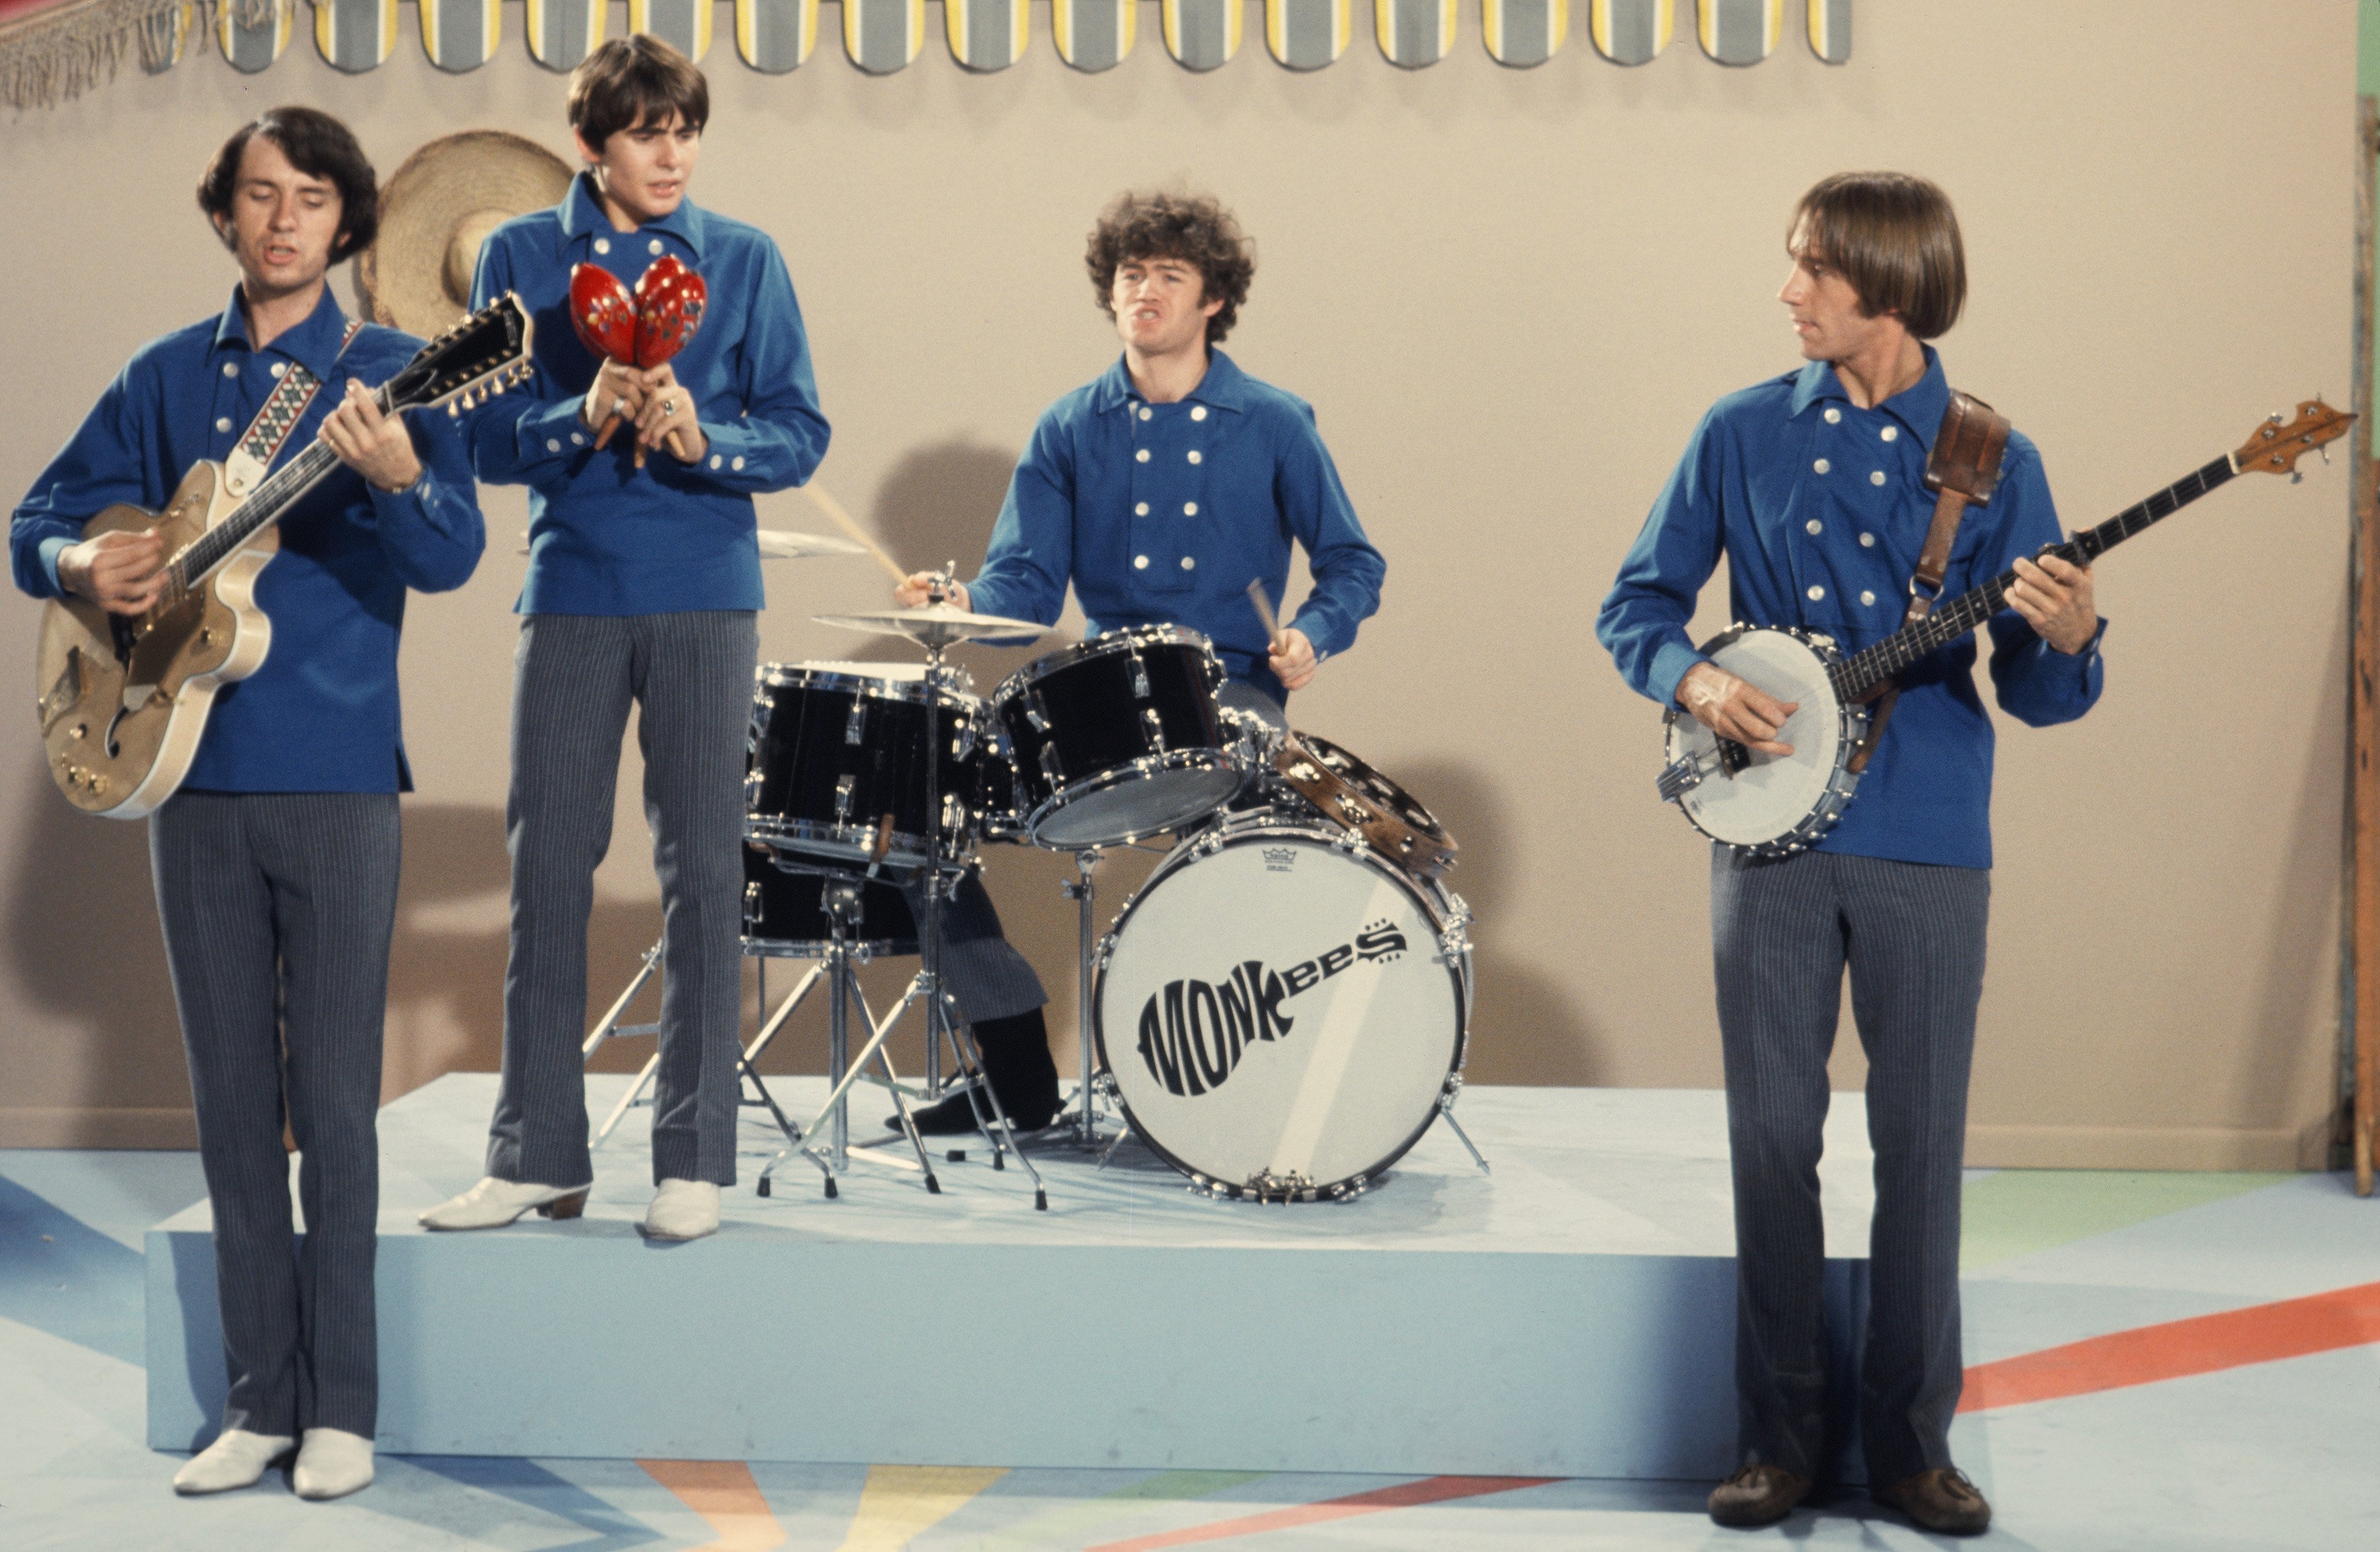 The Monkees' Mike Nesmith, Davy Jones, Micky Dolenz, and Peter Tork wearing blue